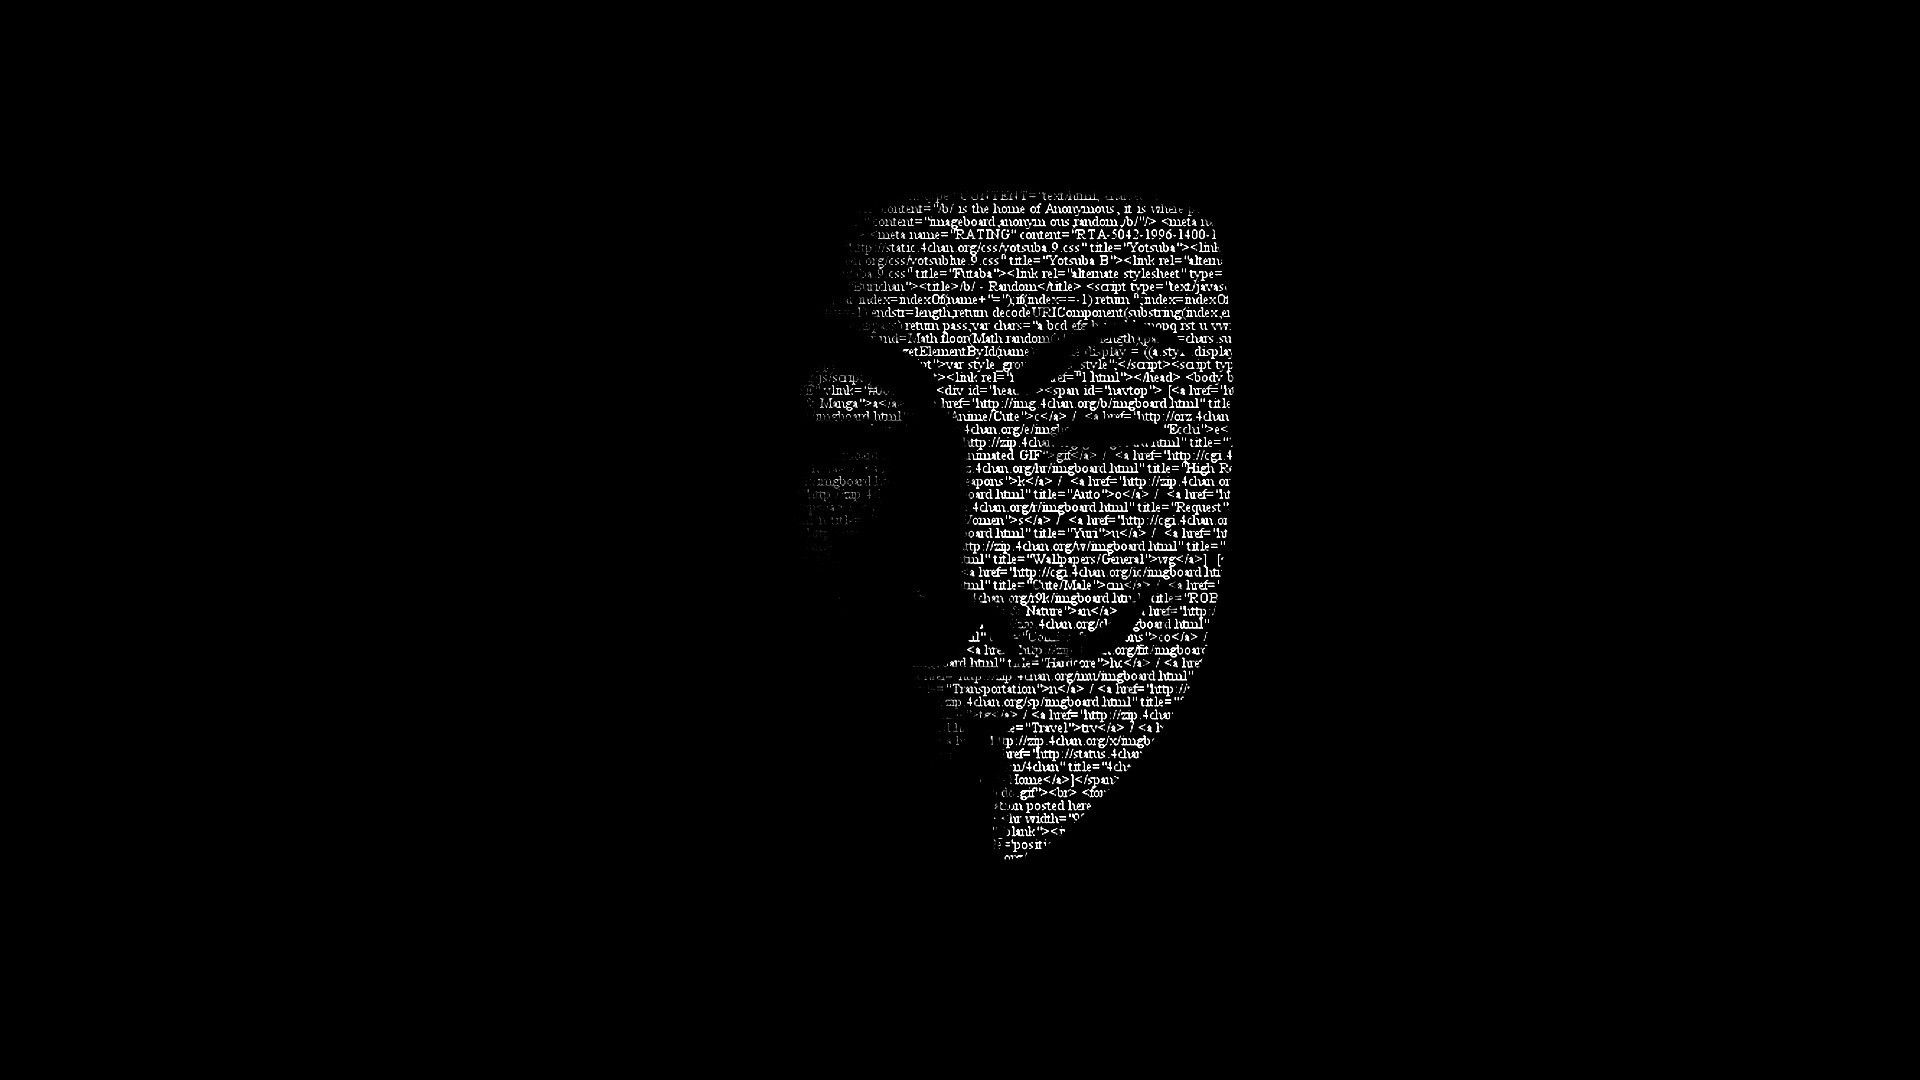 We Are Legion: The Story of the Hacktivists background